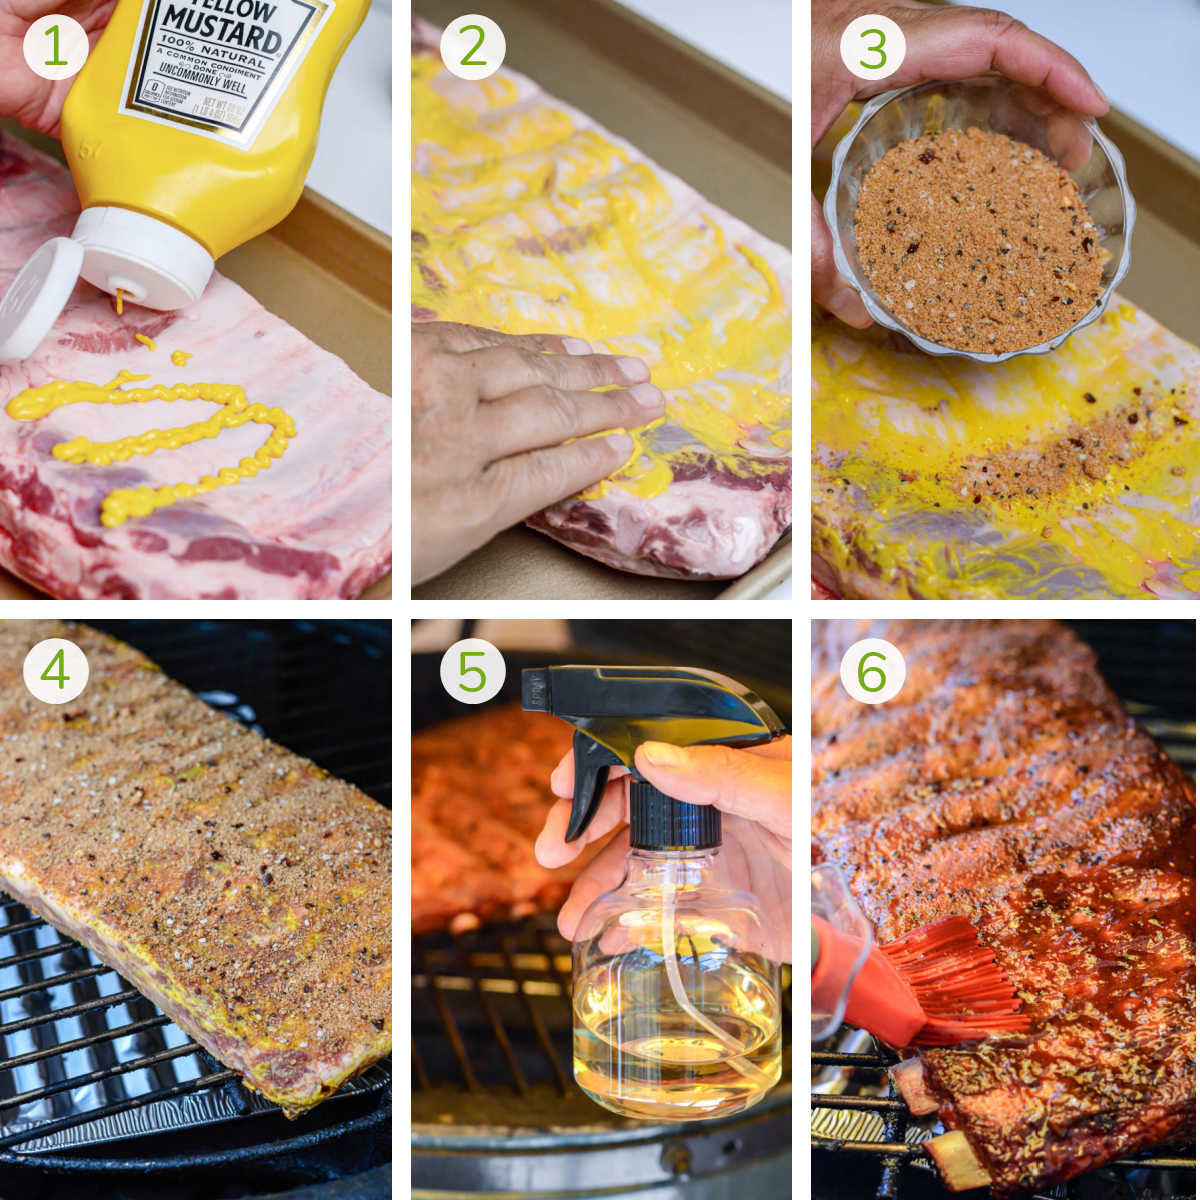 several instruction photos showing applying the binding agent, adding the dry rub, grilling, spritzing with vinegar and then basting with a BBQ sauce.